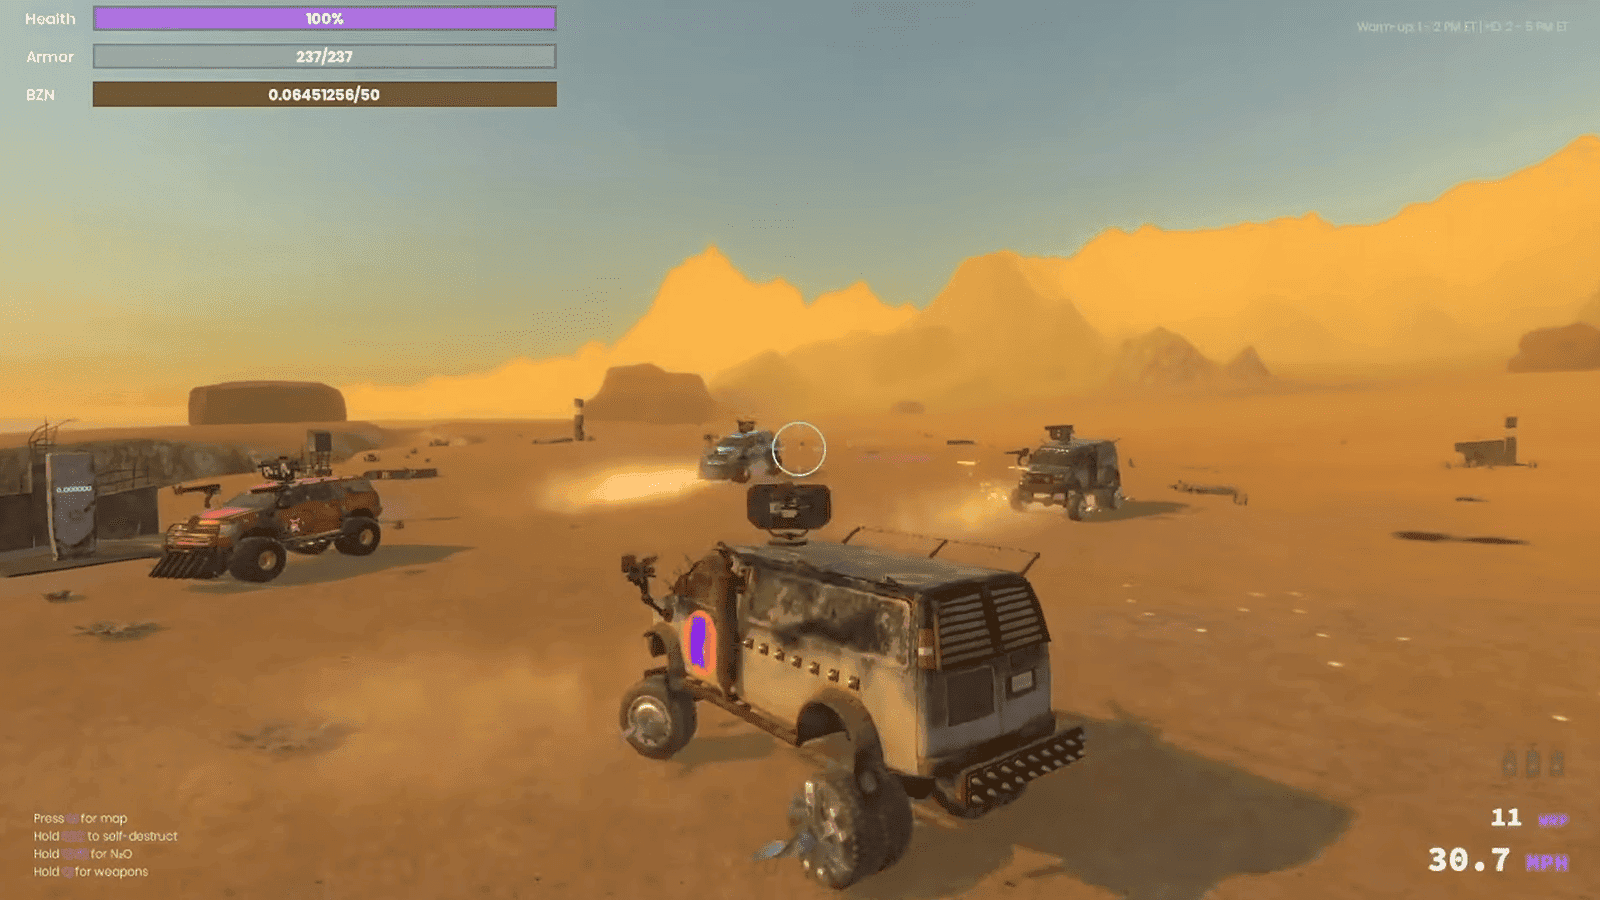 Cartified is the game developer of the play to earn game War Riders, a game on WEB3 side of gaming showcasing a vast post-apocalyptic world